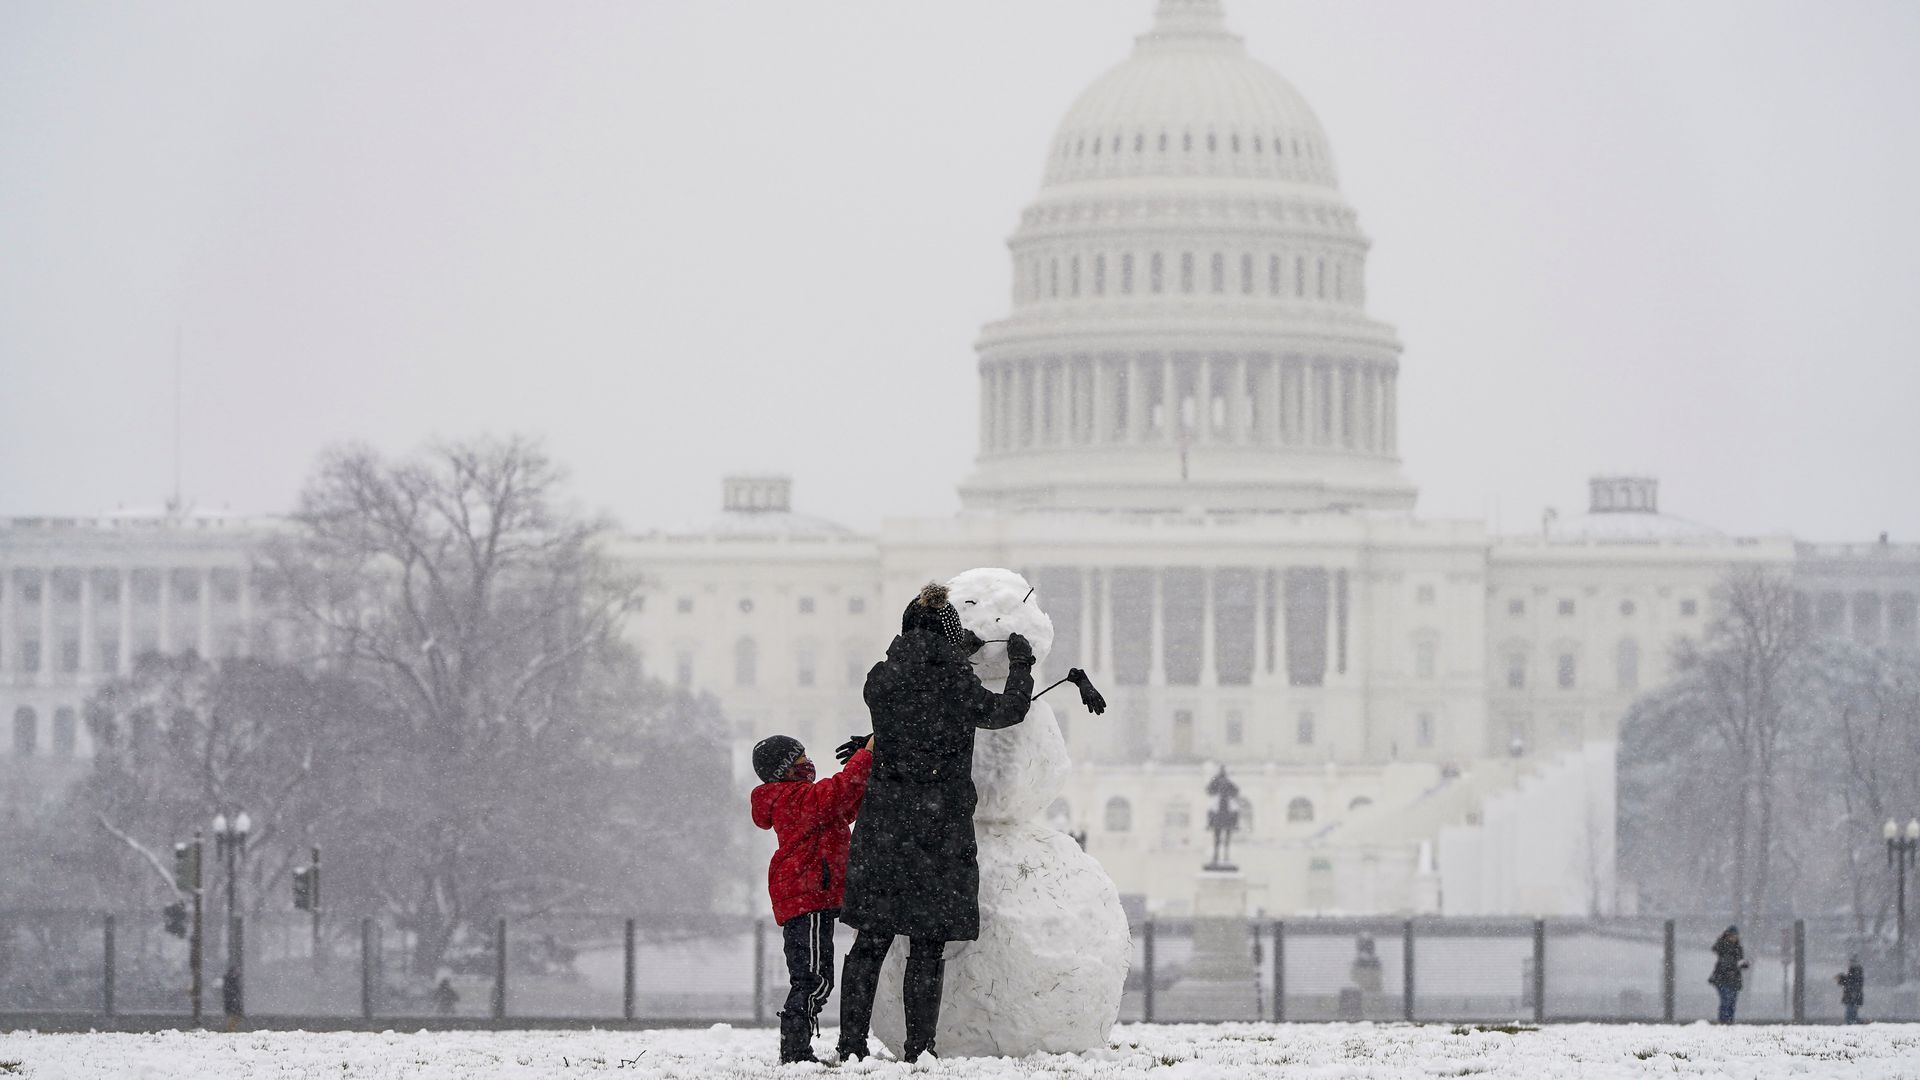 The National Mall on Jan. 31 in Washington, D.C. covered in snow